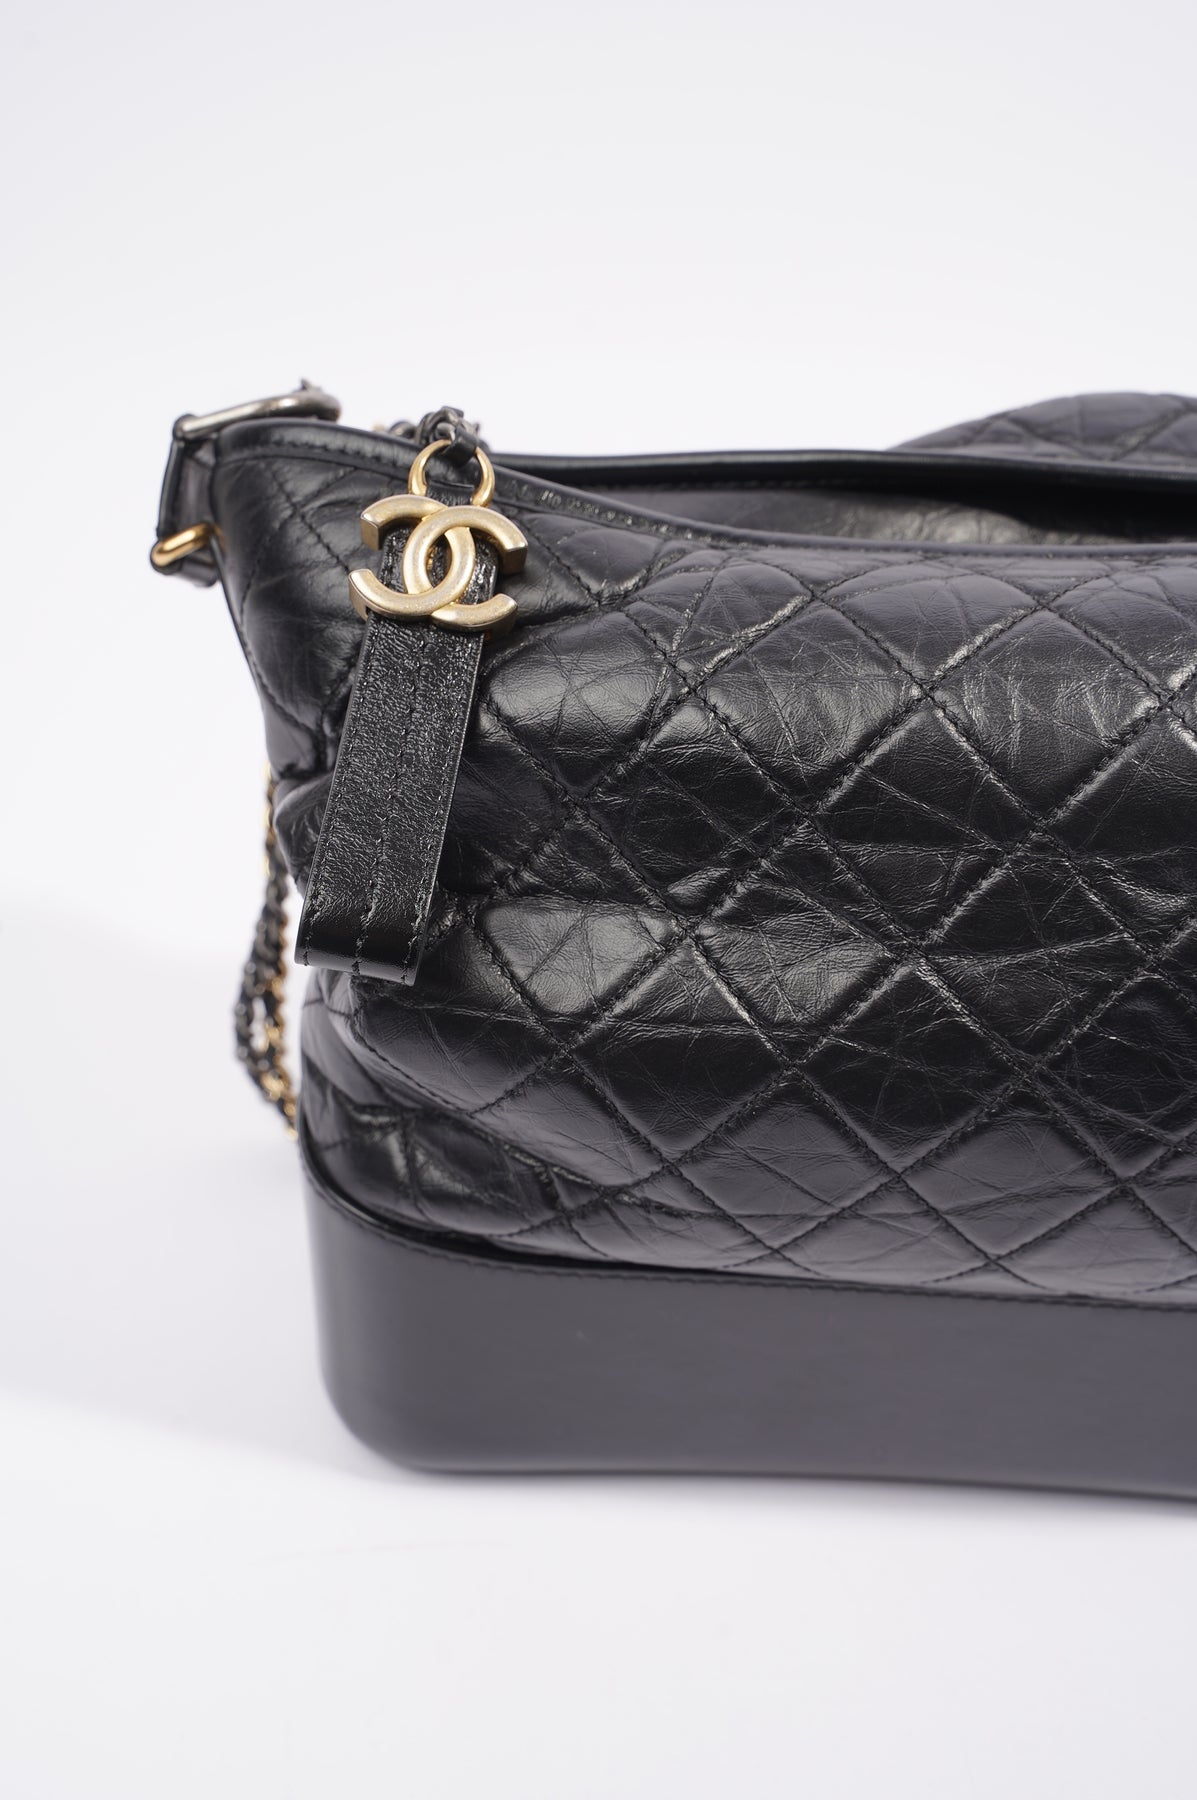 CHANEL Gabrielle Hobo, Large